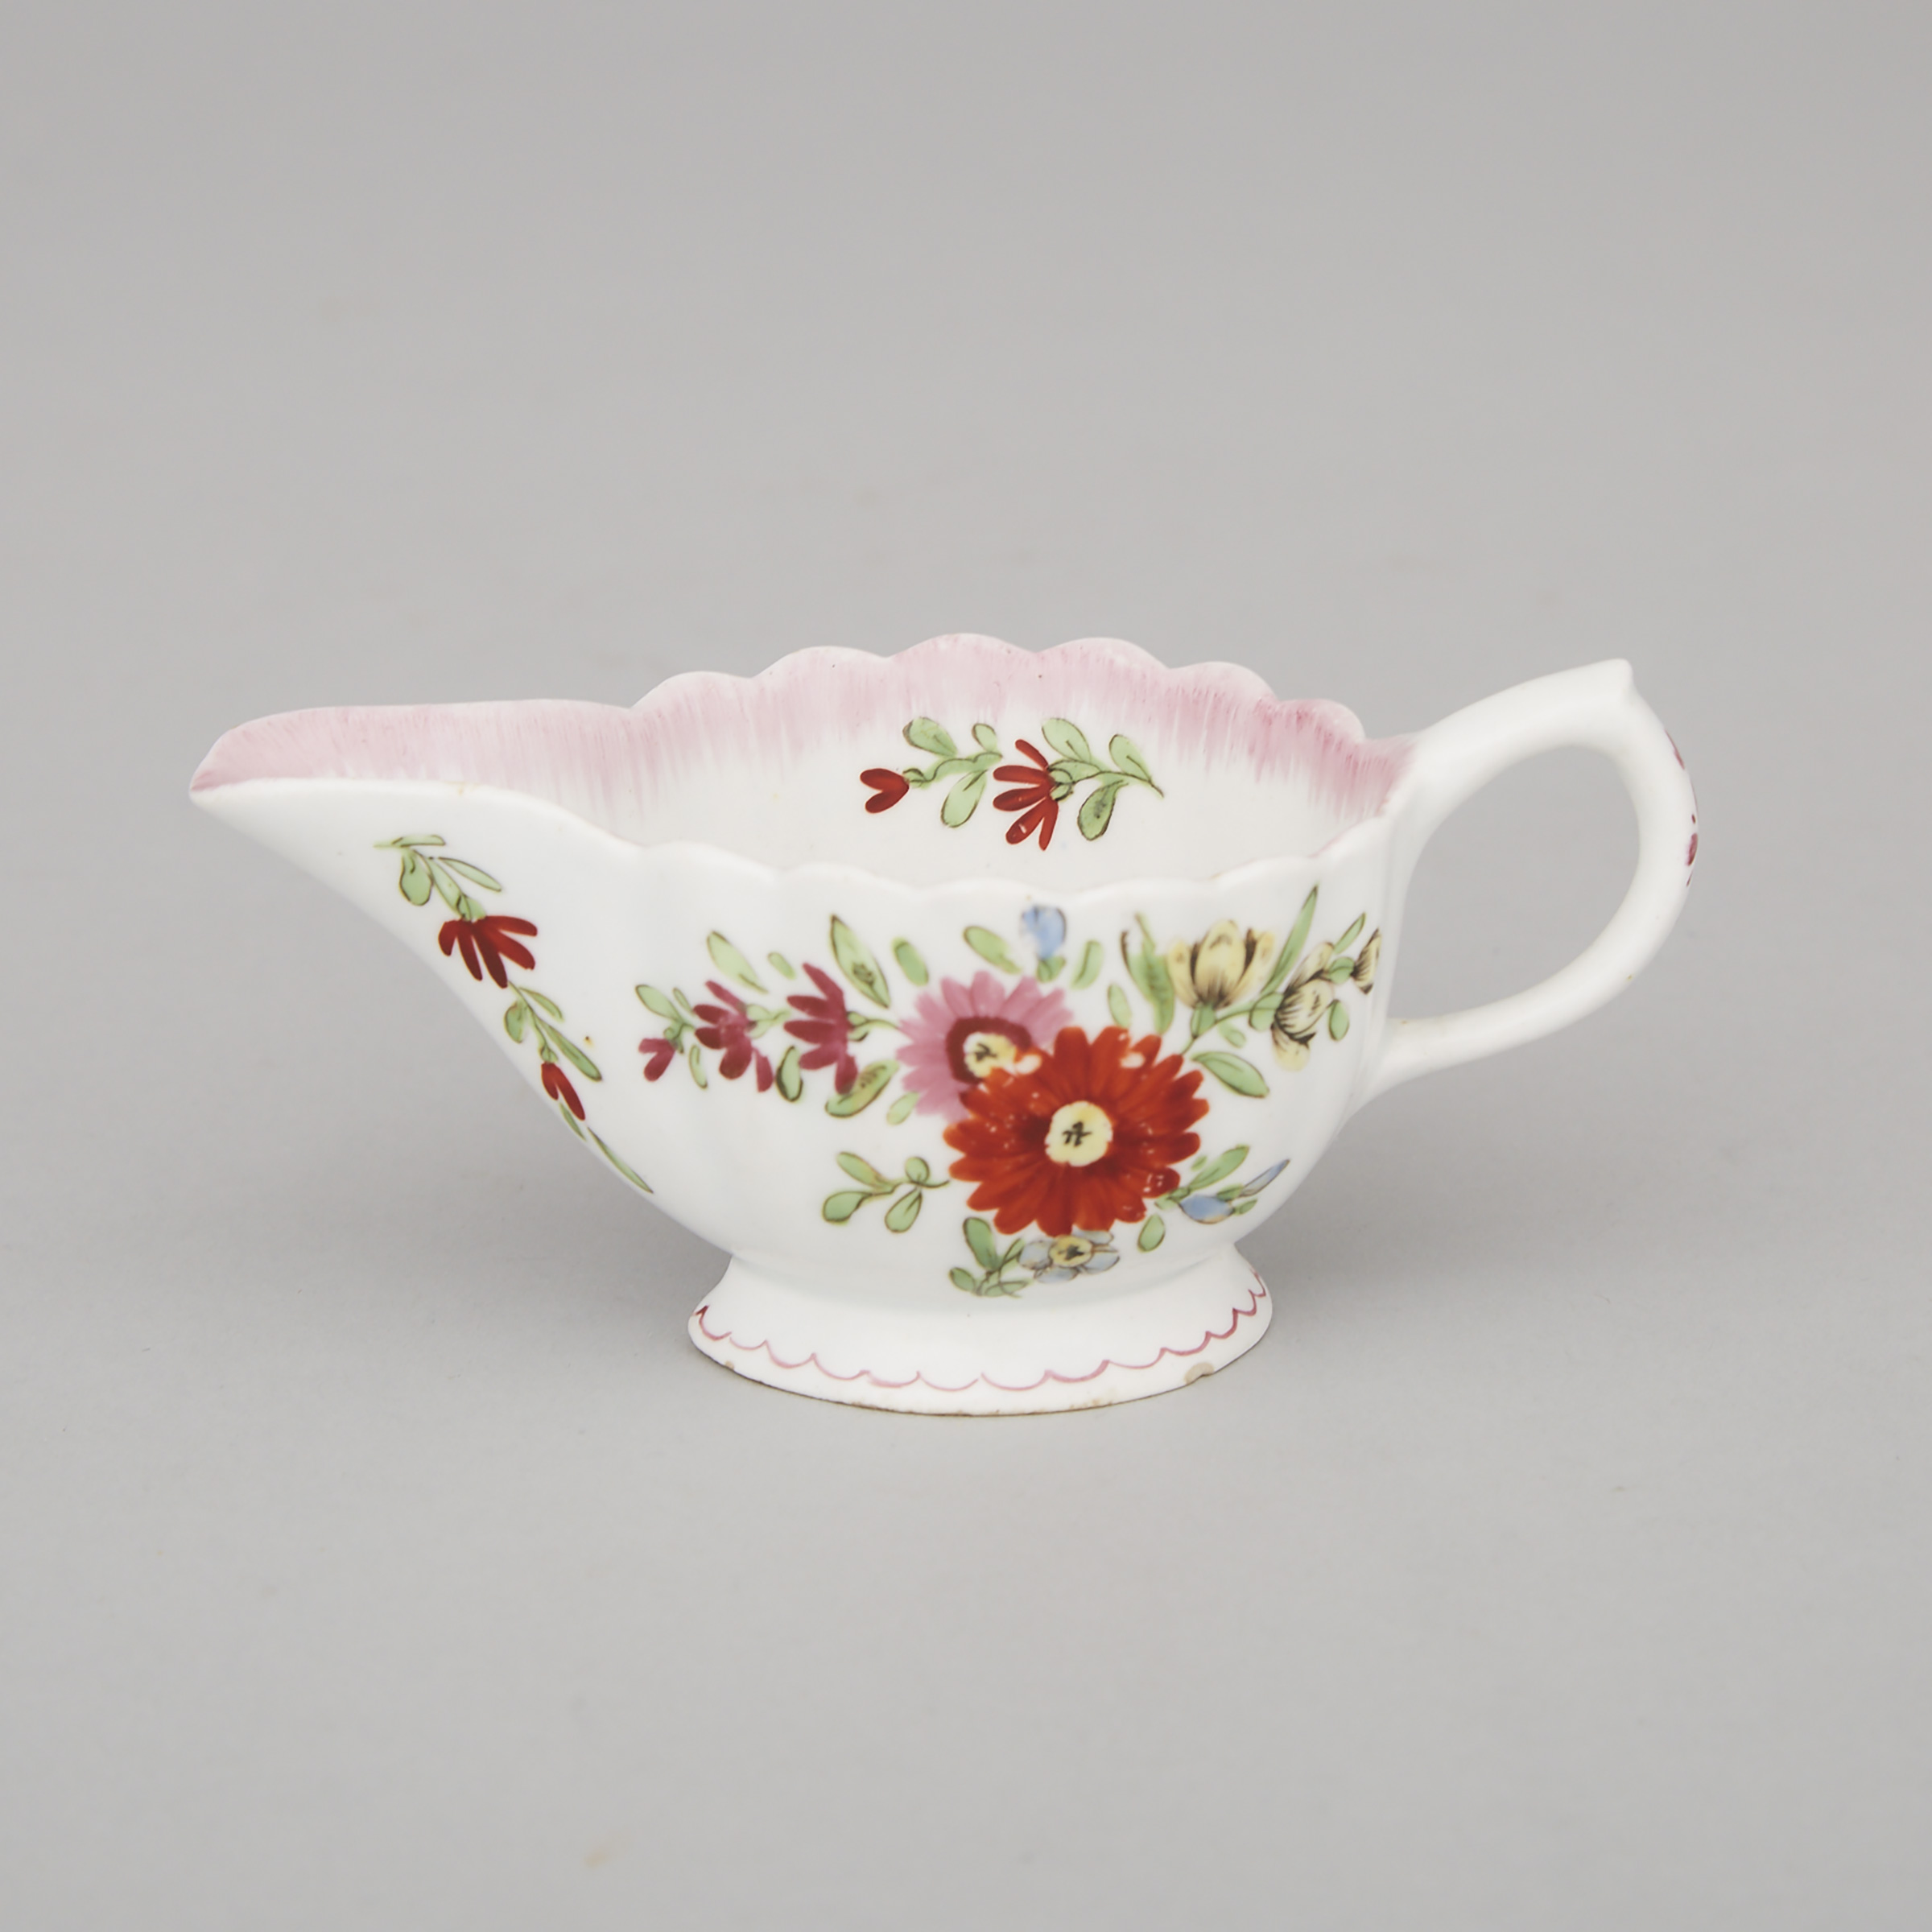 Bow Polychrome Floral Decorated Cream Boat, c.1765